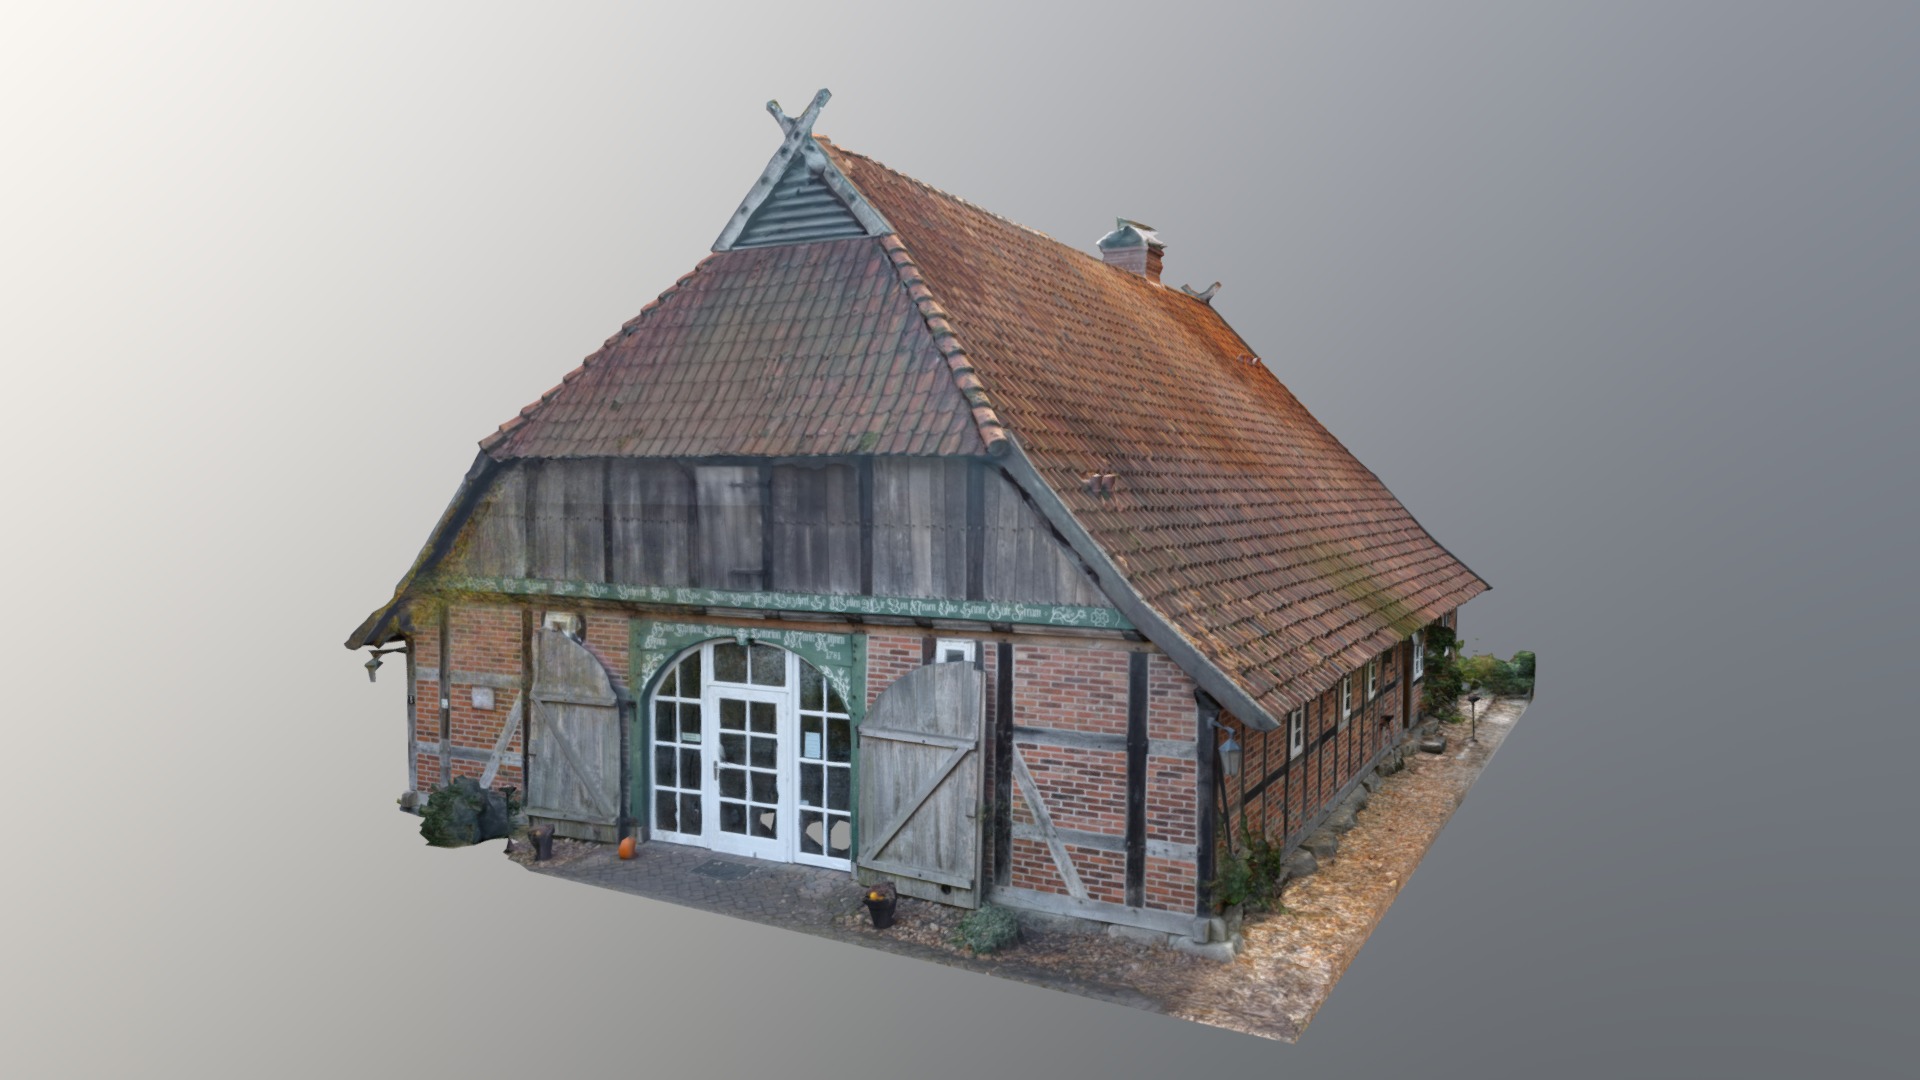 3D model Kalandhof - This is a 3D model of the Kalandhof. The 3D model is about a wooden house with a red roof.